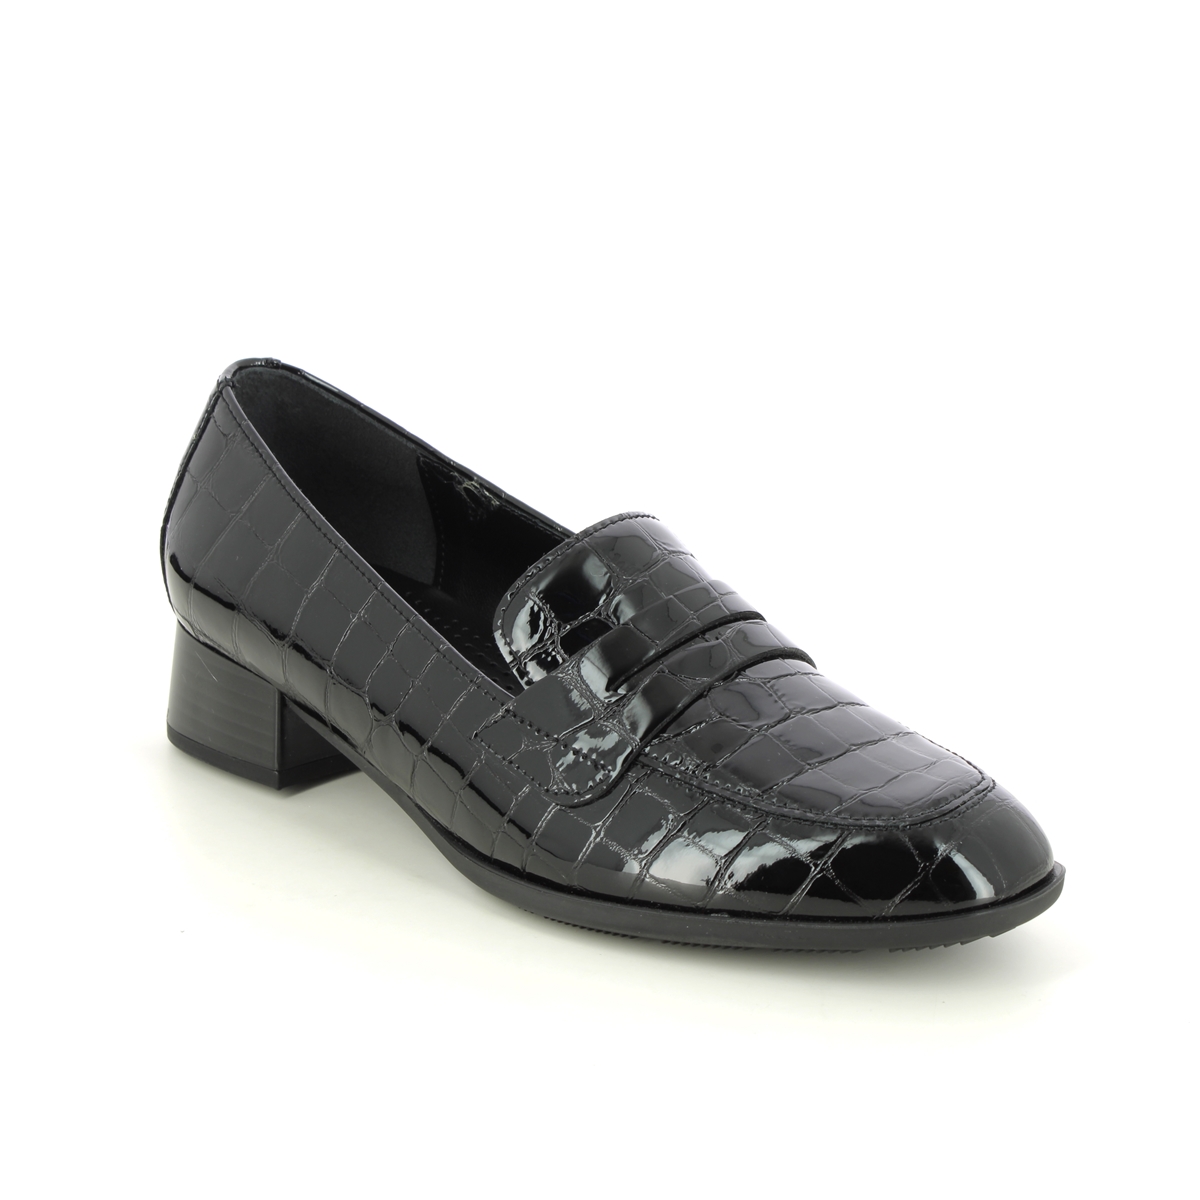 Gabor Right Penny Black Croc Womens Loafers 35.280.97 In Size 6.5 In Plain Black Croc Effect  Womens Loafers In Soft Black Croc Effect Leather